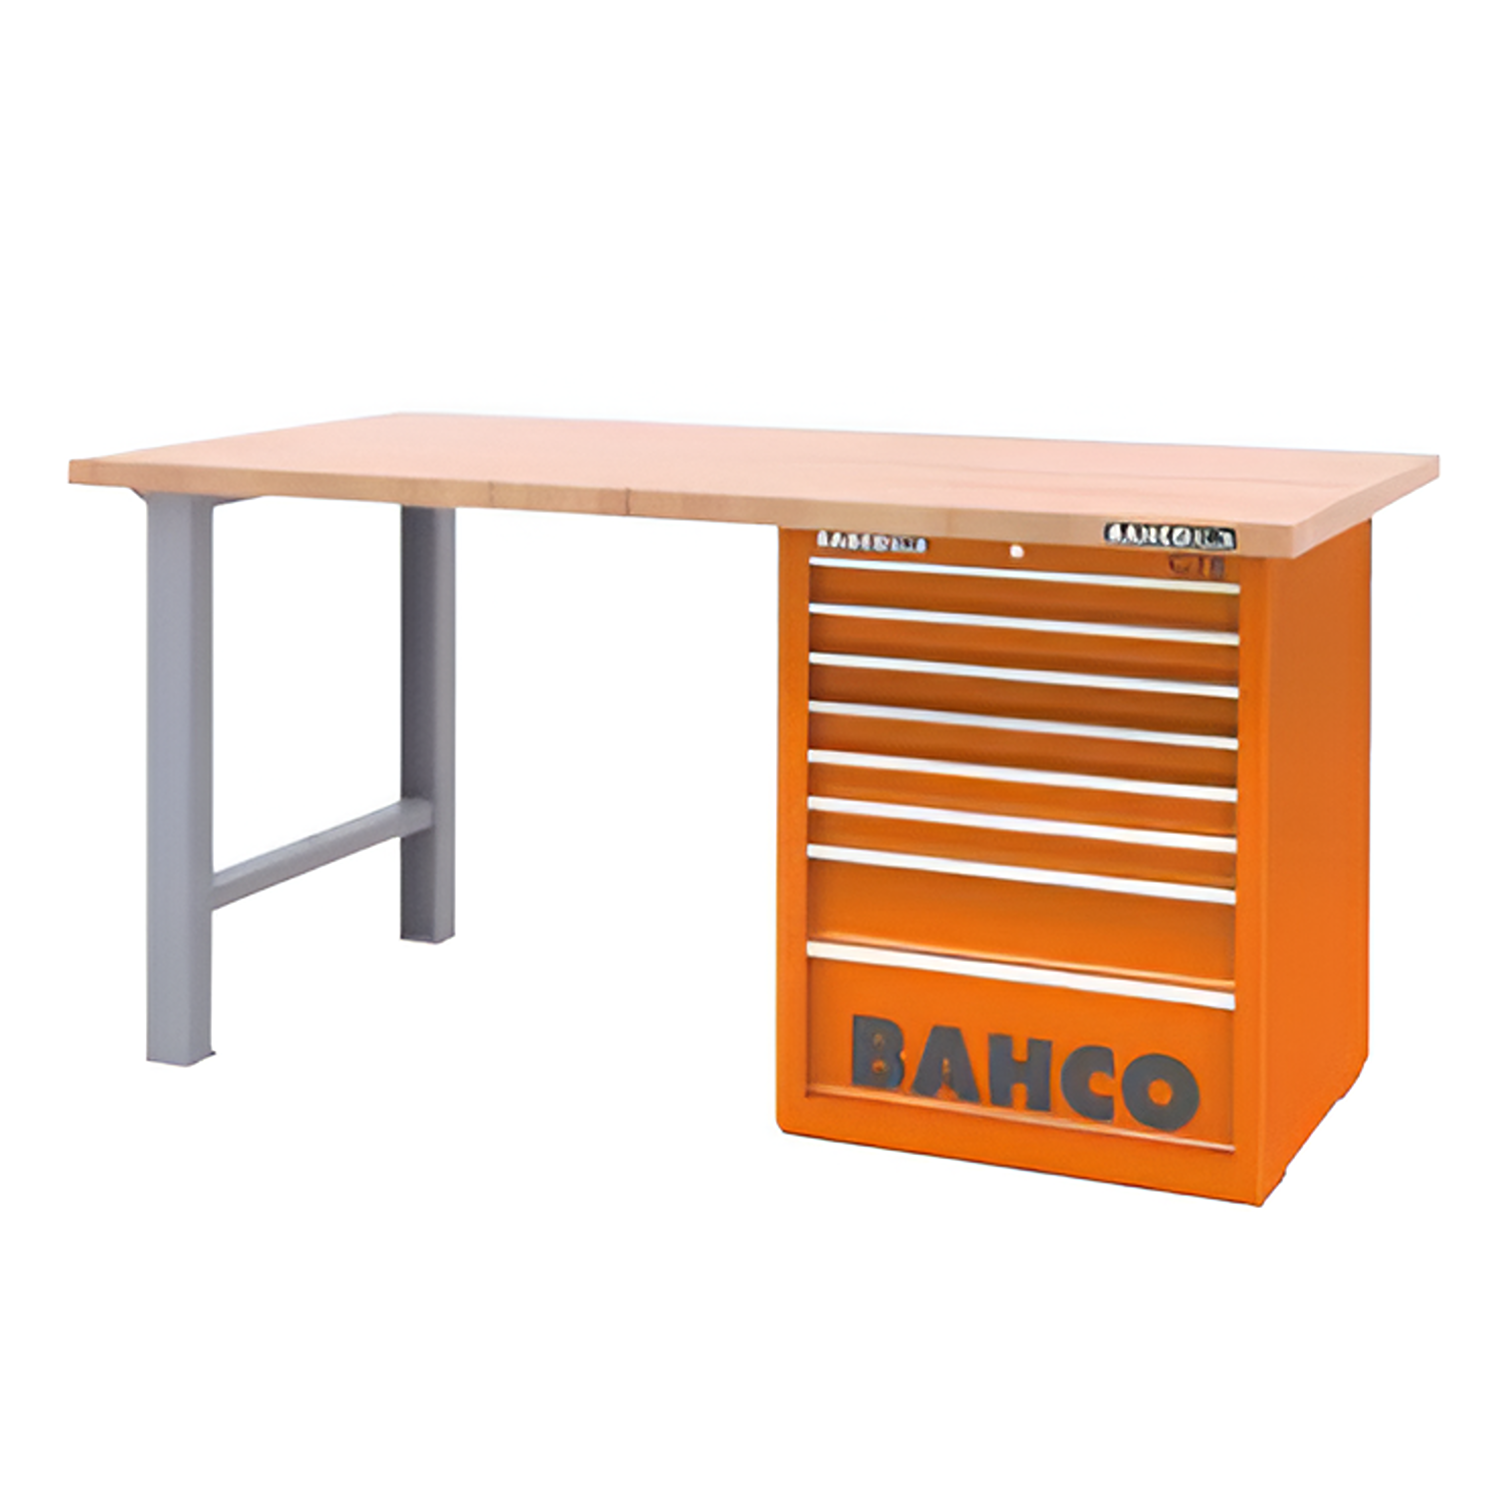 BAHCO 1495KHWB15TW Wall or Bench Mount Cabinet with Shutter - Premium Bench Mount Cabinet from BAHCO - Shop now at Yew Aik.